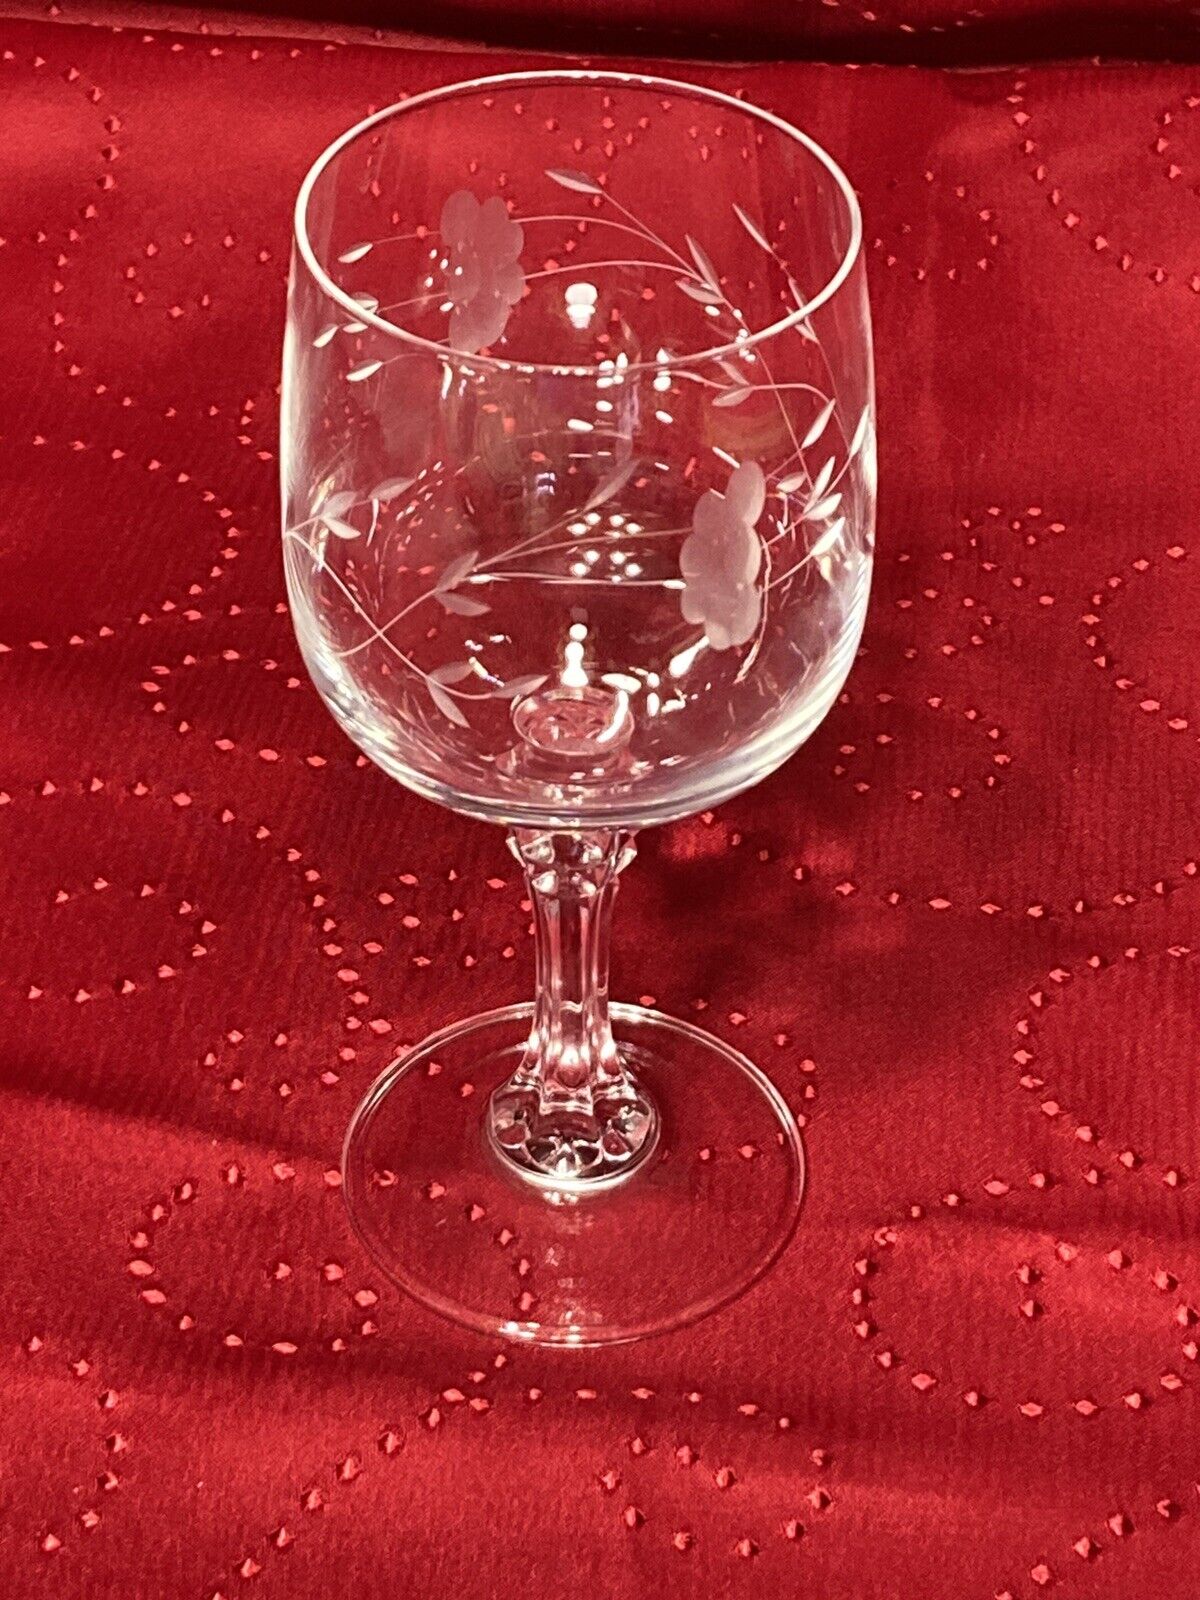 Princess House Bordeaux HERITAGE Floral Cut Clear 6 inch Wine Glass